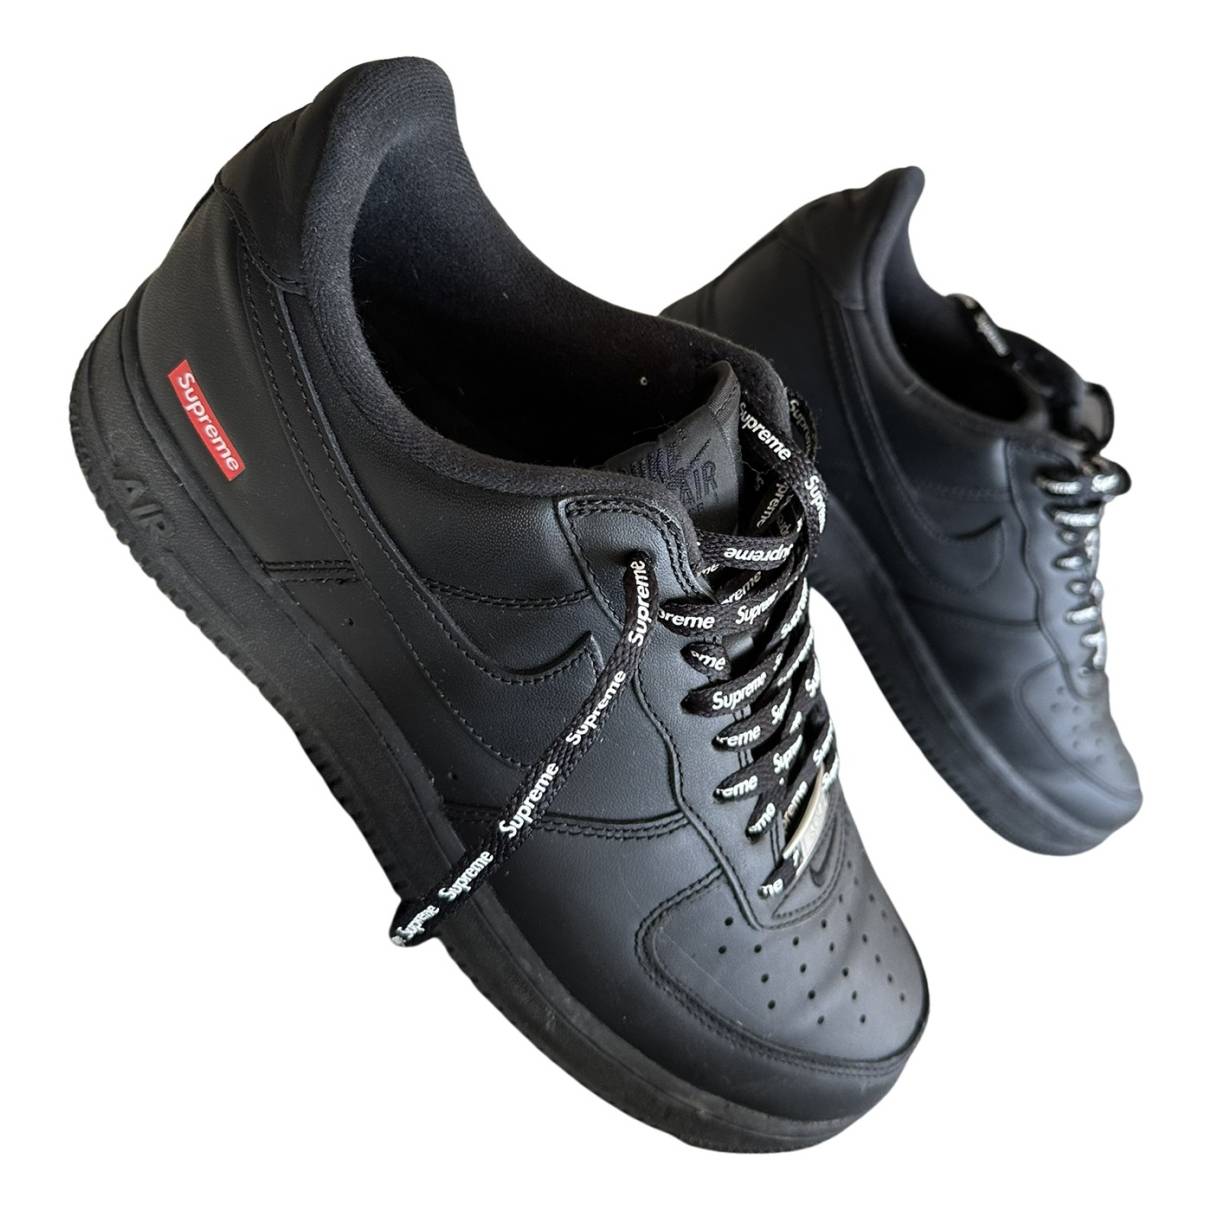 Air force 1 leather low trainers Nike x Supreme Black size 42 EU in Leather  - 32572023